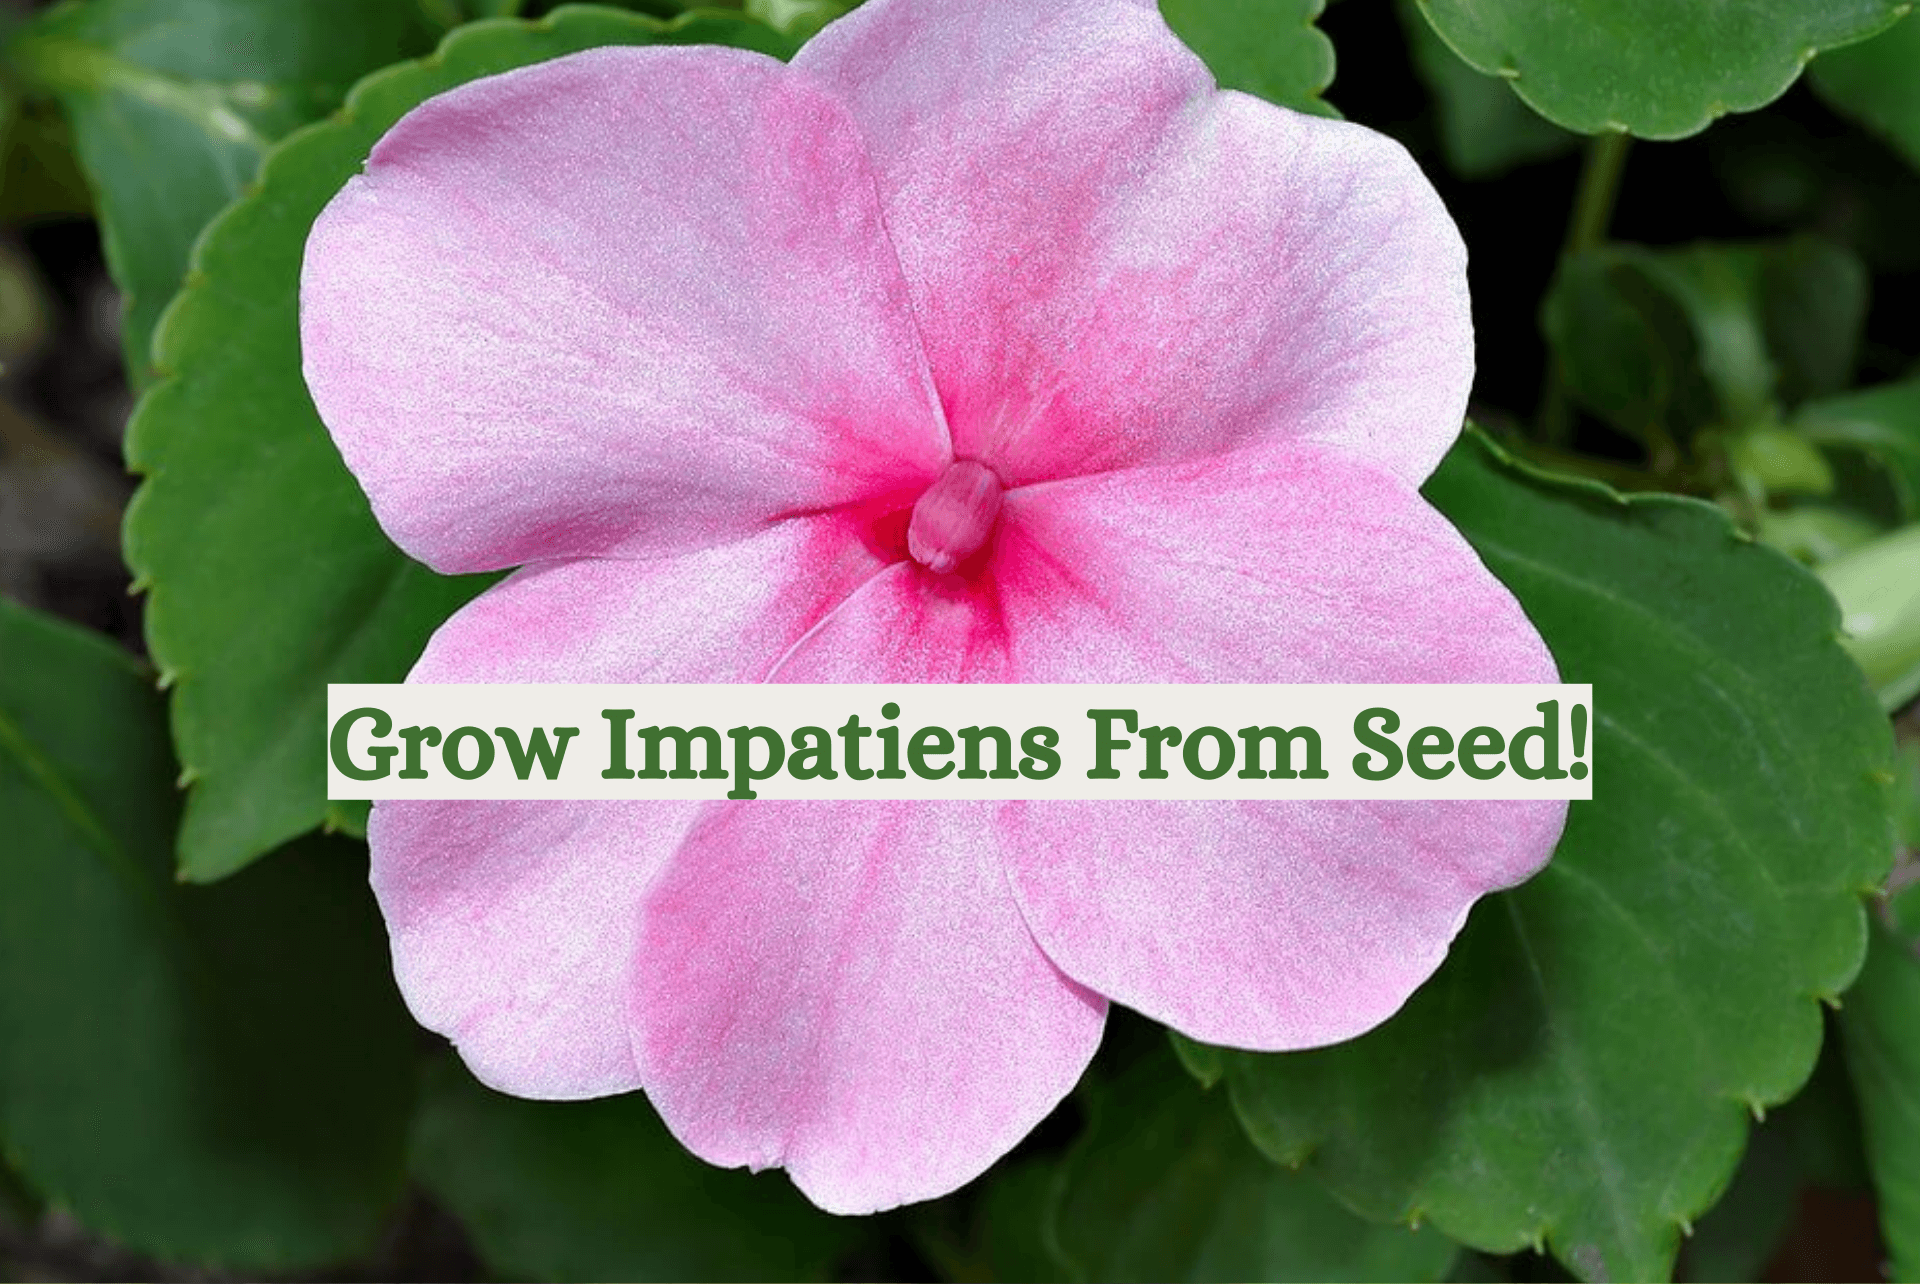 How to Germinate Impatiens Seeds